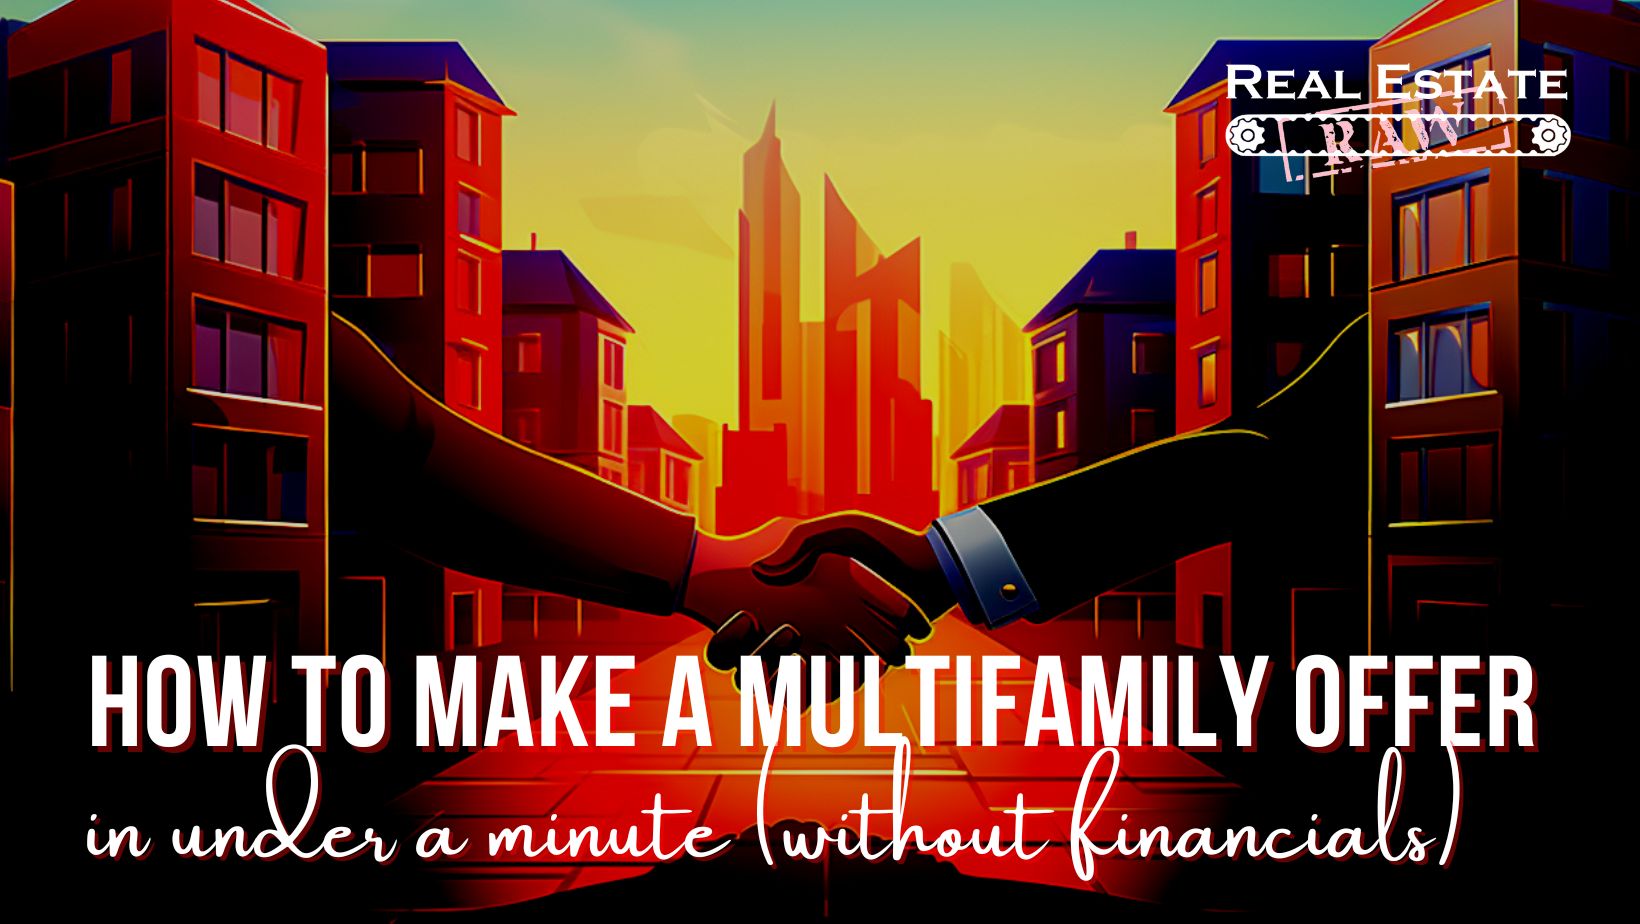 How to Make a Multifamily Offer in Under a Minute (Without Financials)